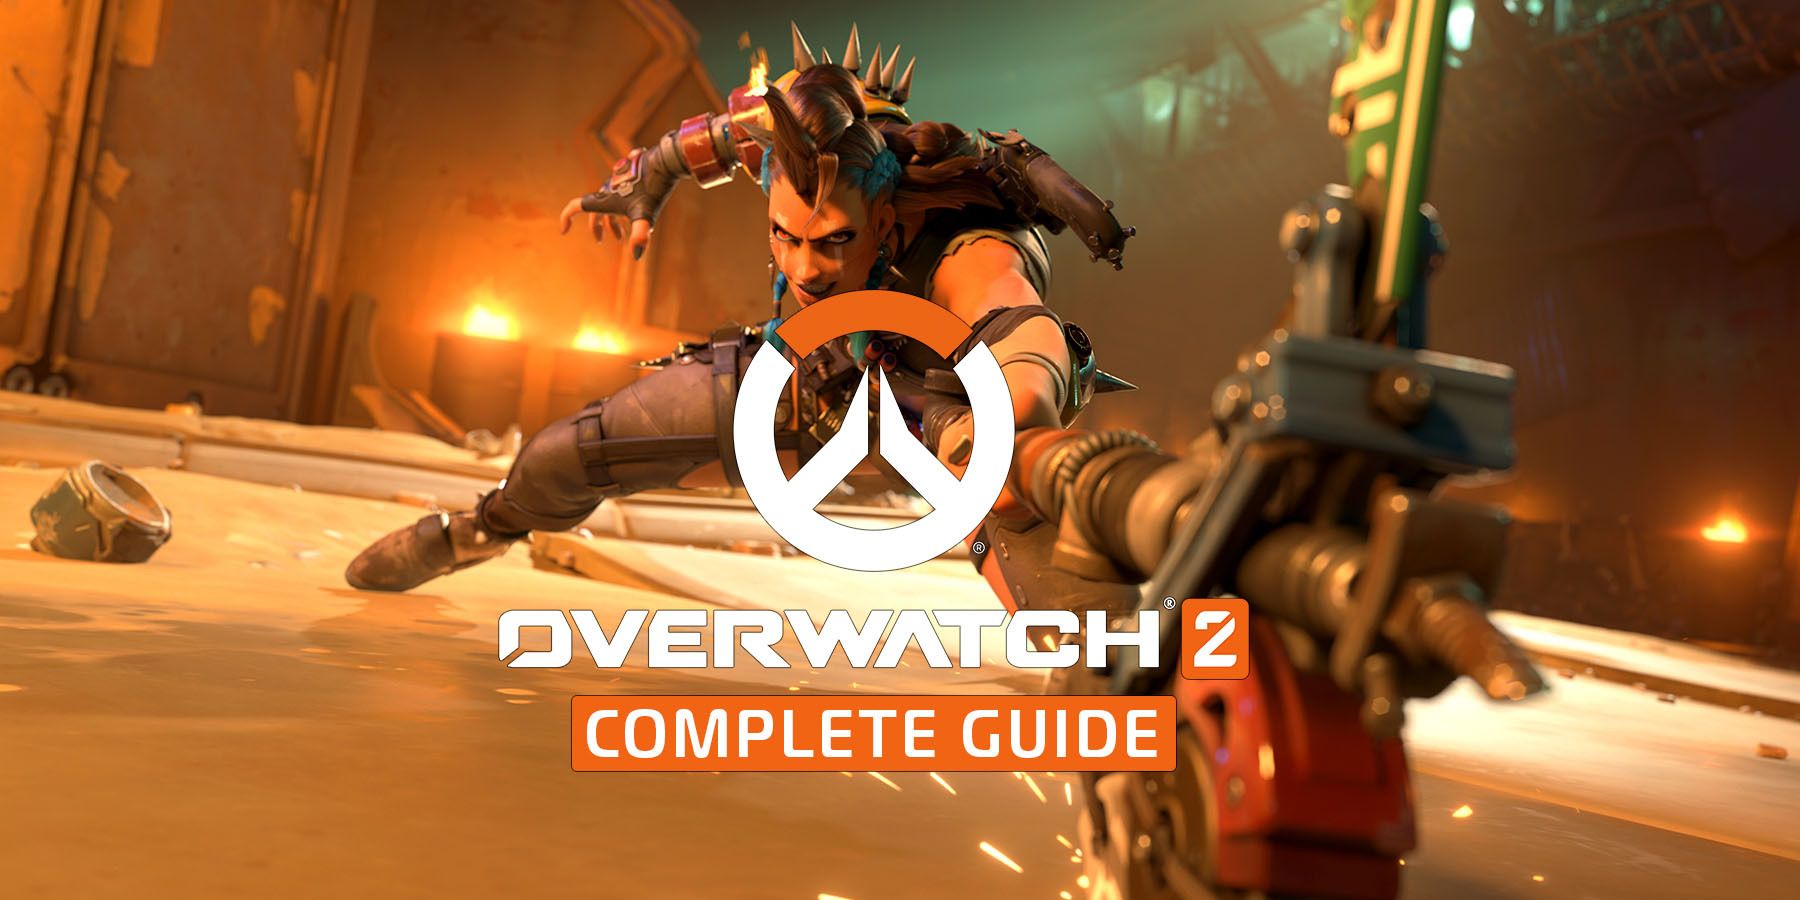 Overwatch 2 complete guide